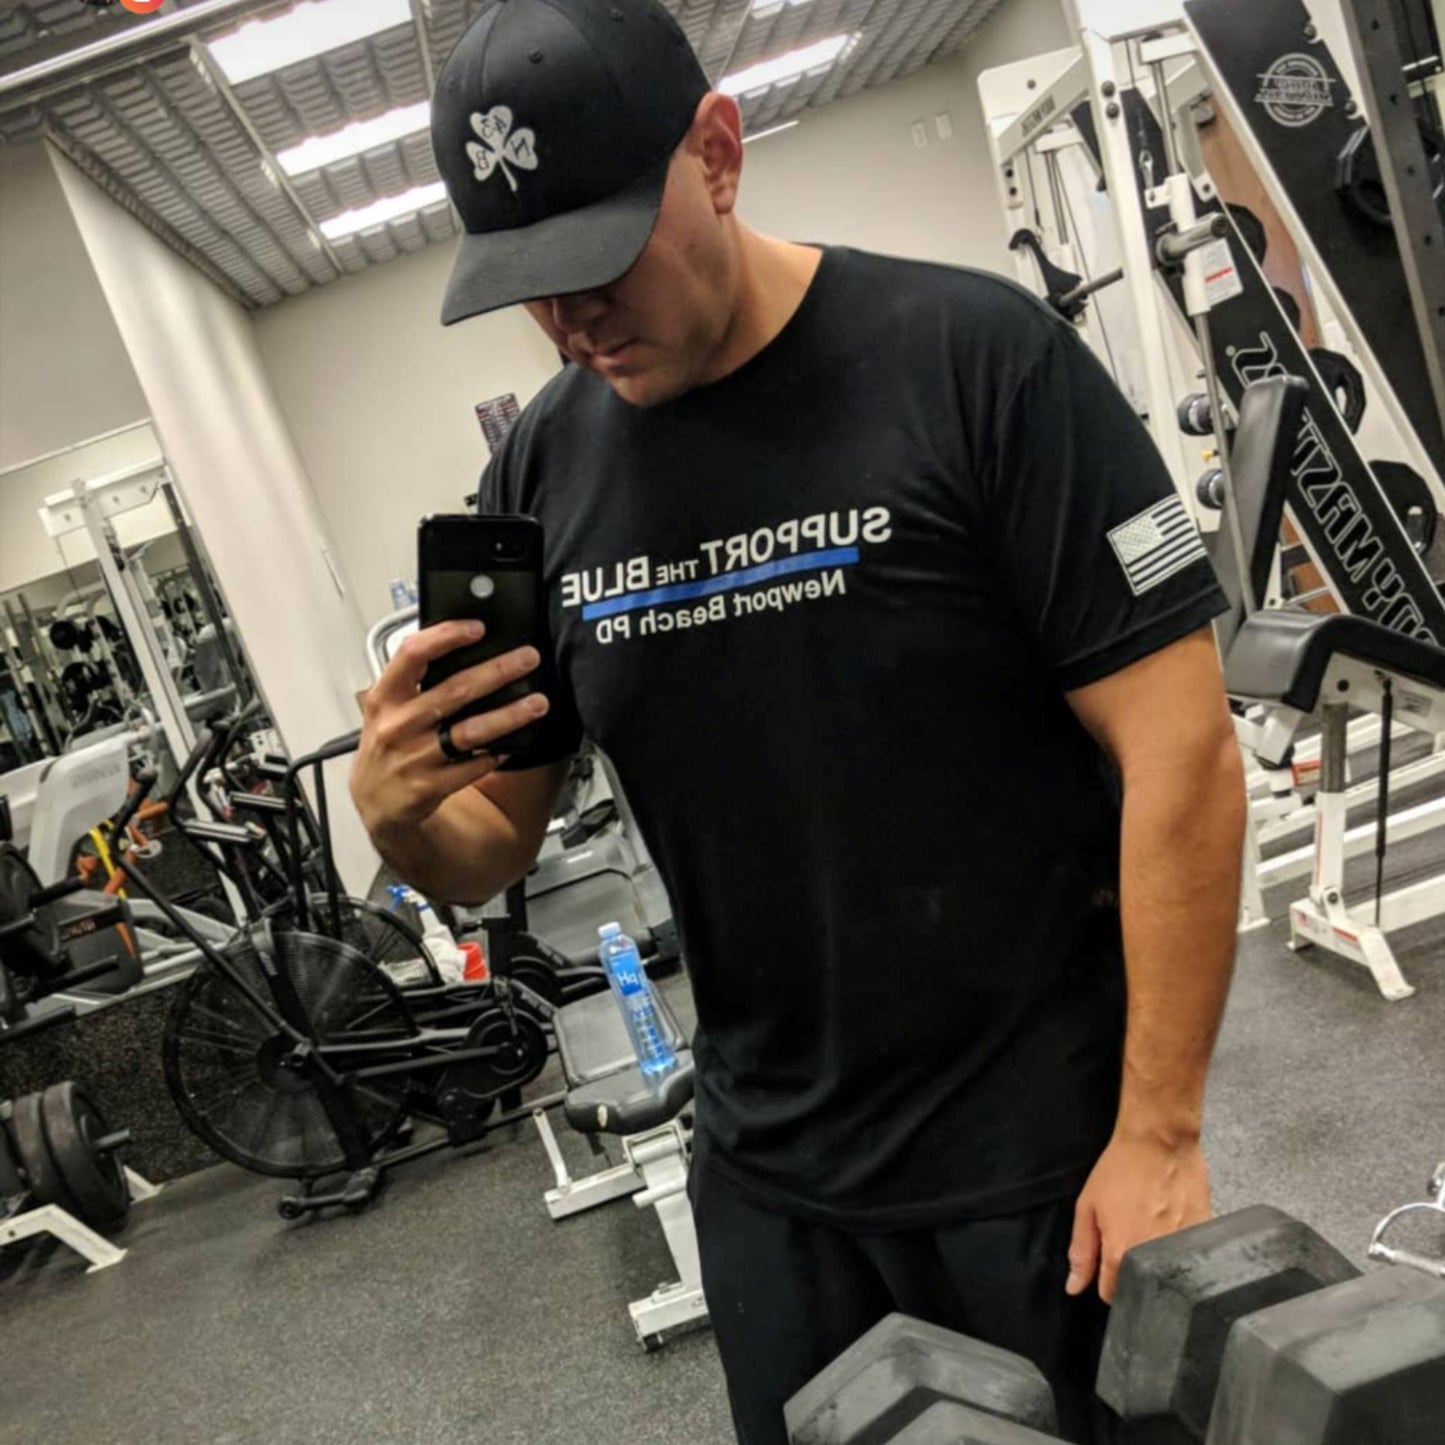 Support The Blue - Newport PD - Thin Blue Line T-Shirts Blue Life Apparel 